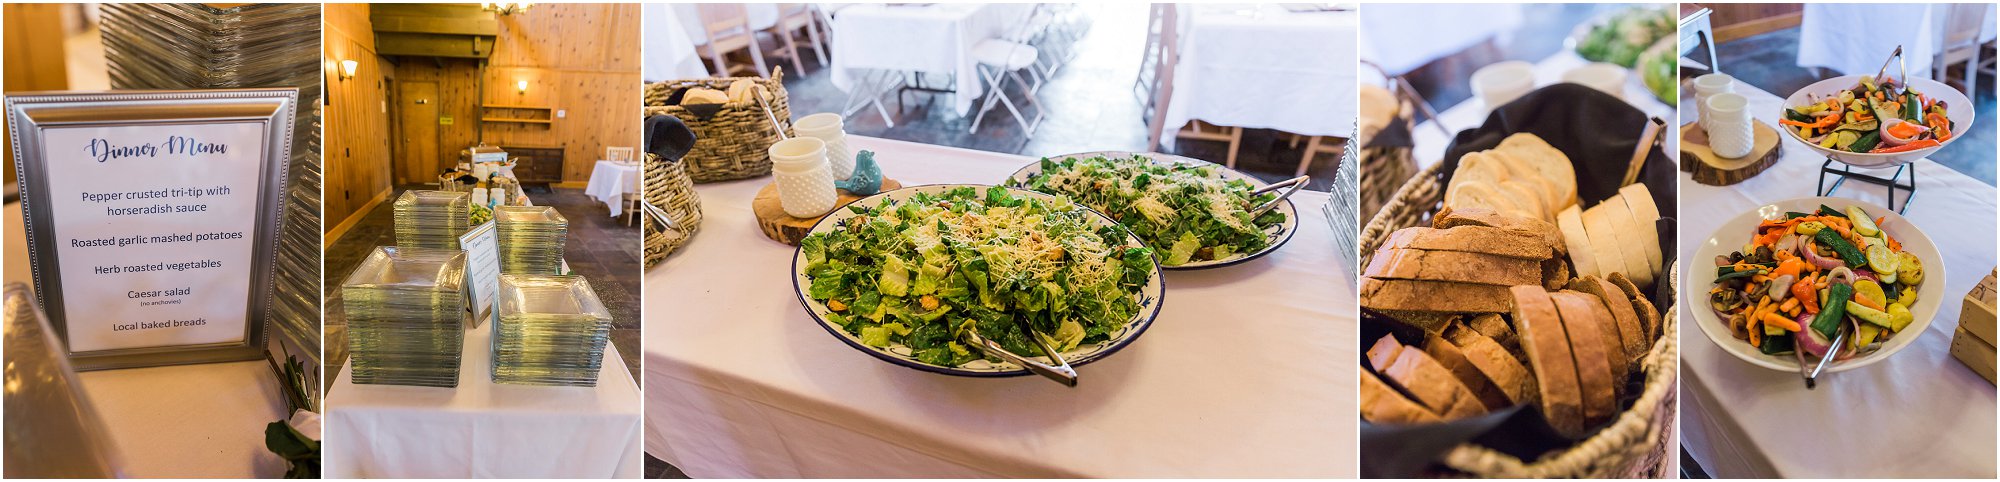 The food Bleu Bite Catering serves at weddings across Central Oregon is always delicious and has a beautiful presentation. | Erica Swantek Photography